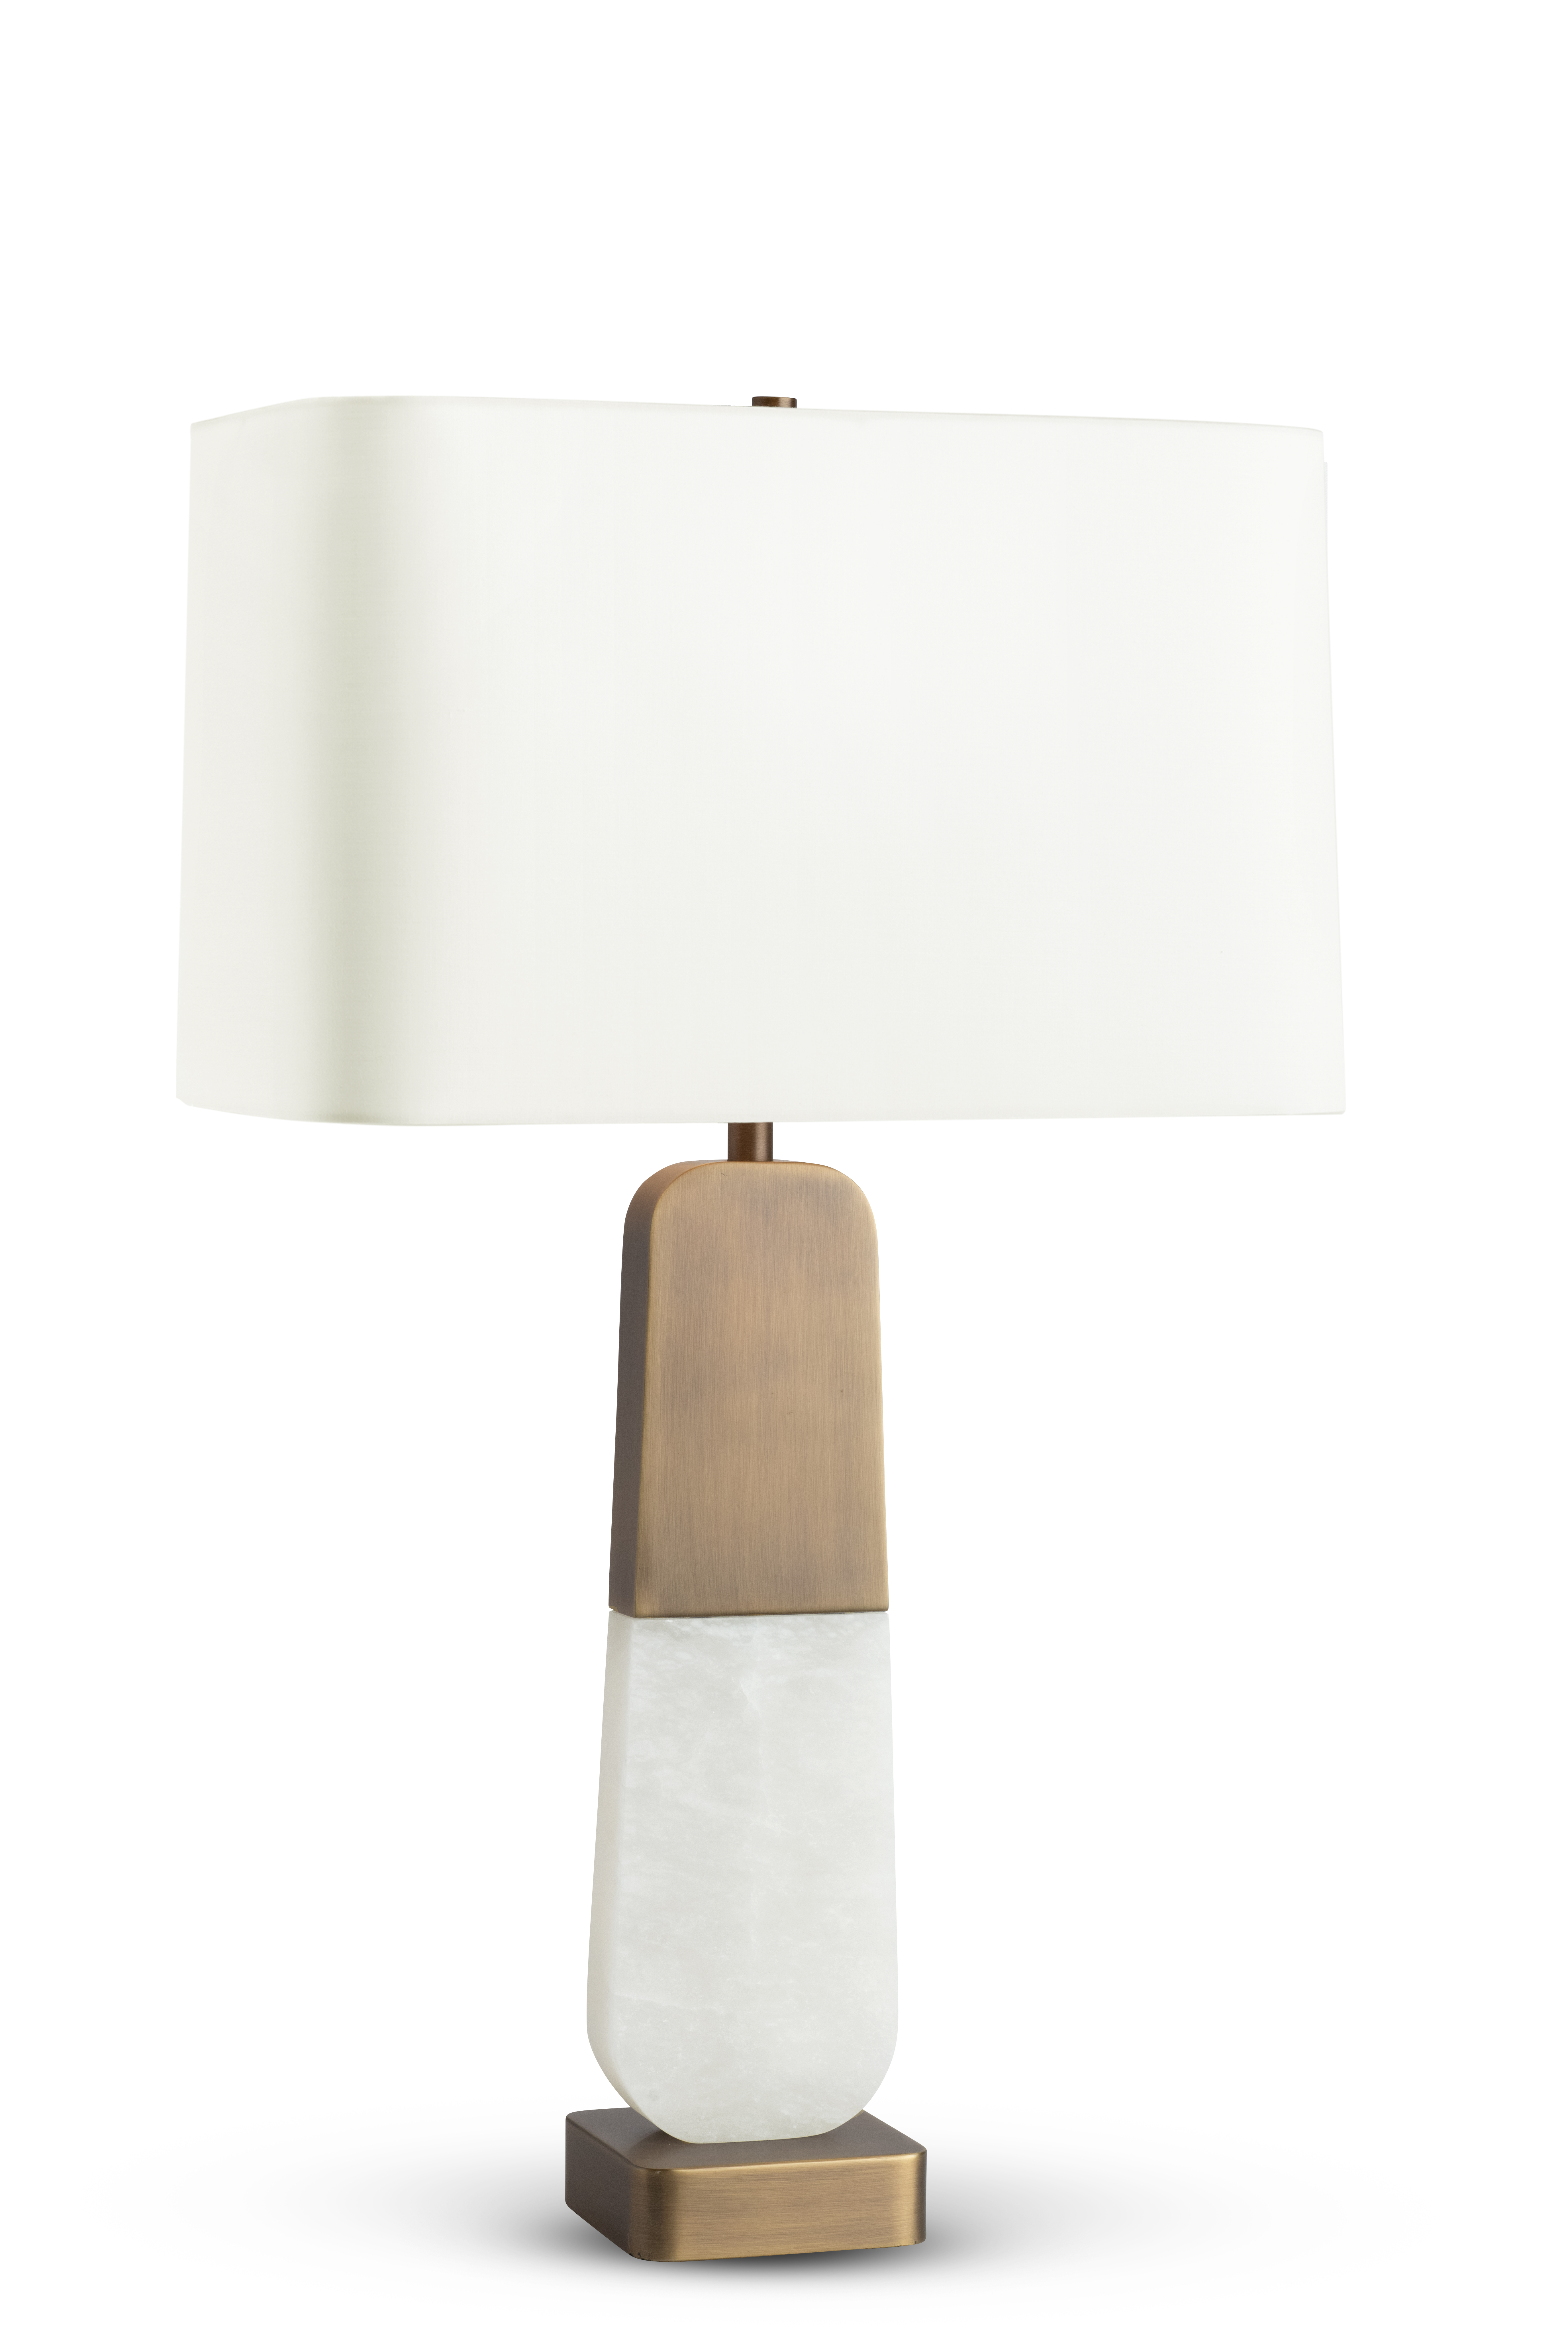 FlowDecor Samuel Table Lamp in alabaster and metal with antique brass finish and off-white linen rounded rectangle shade (# 4558)